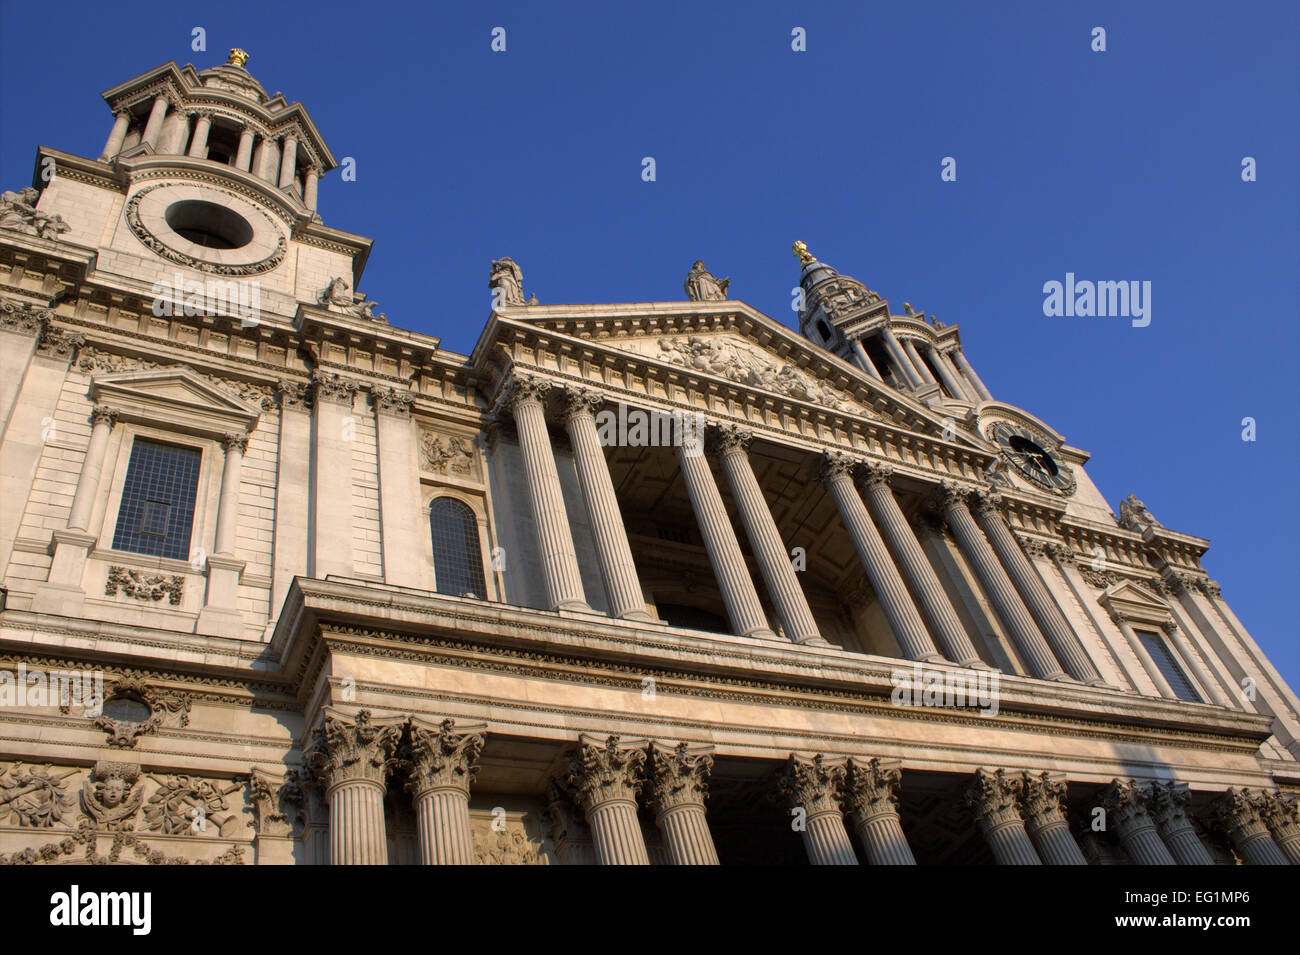 LONDON, UK  - 22nd Sept 2014: Pillars on the front entrance of St Pauls' Cathedral. Stock Photo